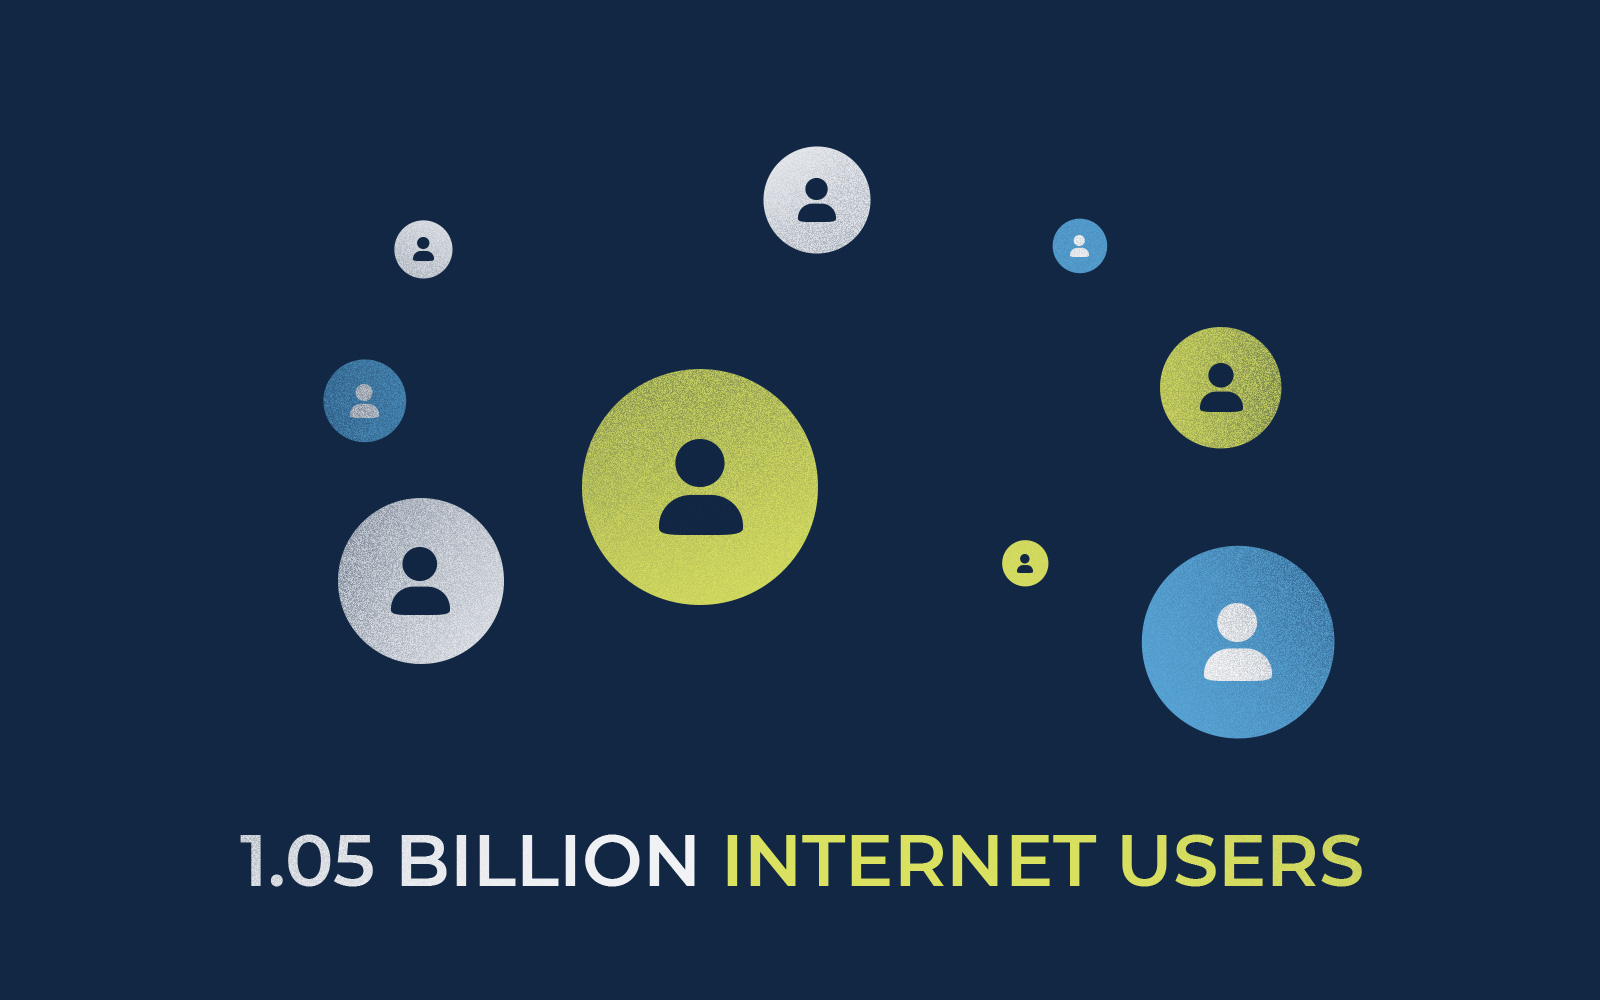 Over 1.05 billion internet users in China - Flow Asia